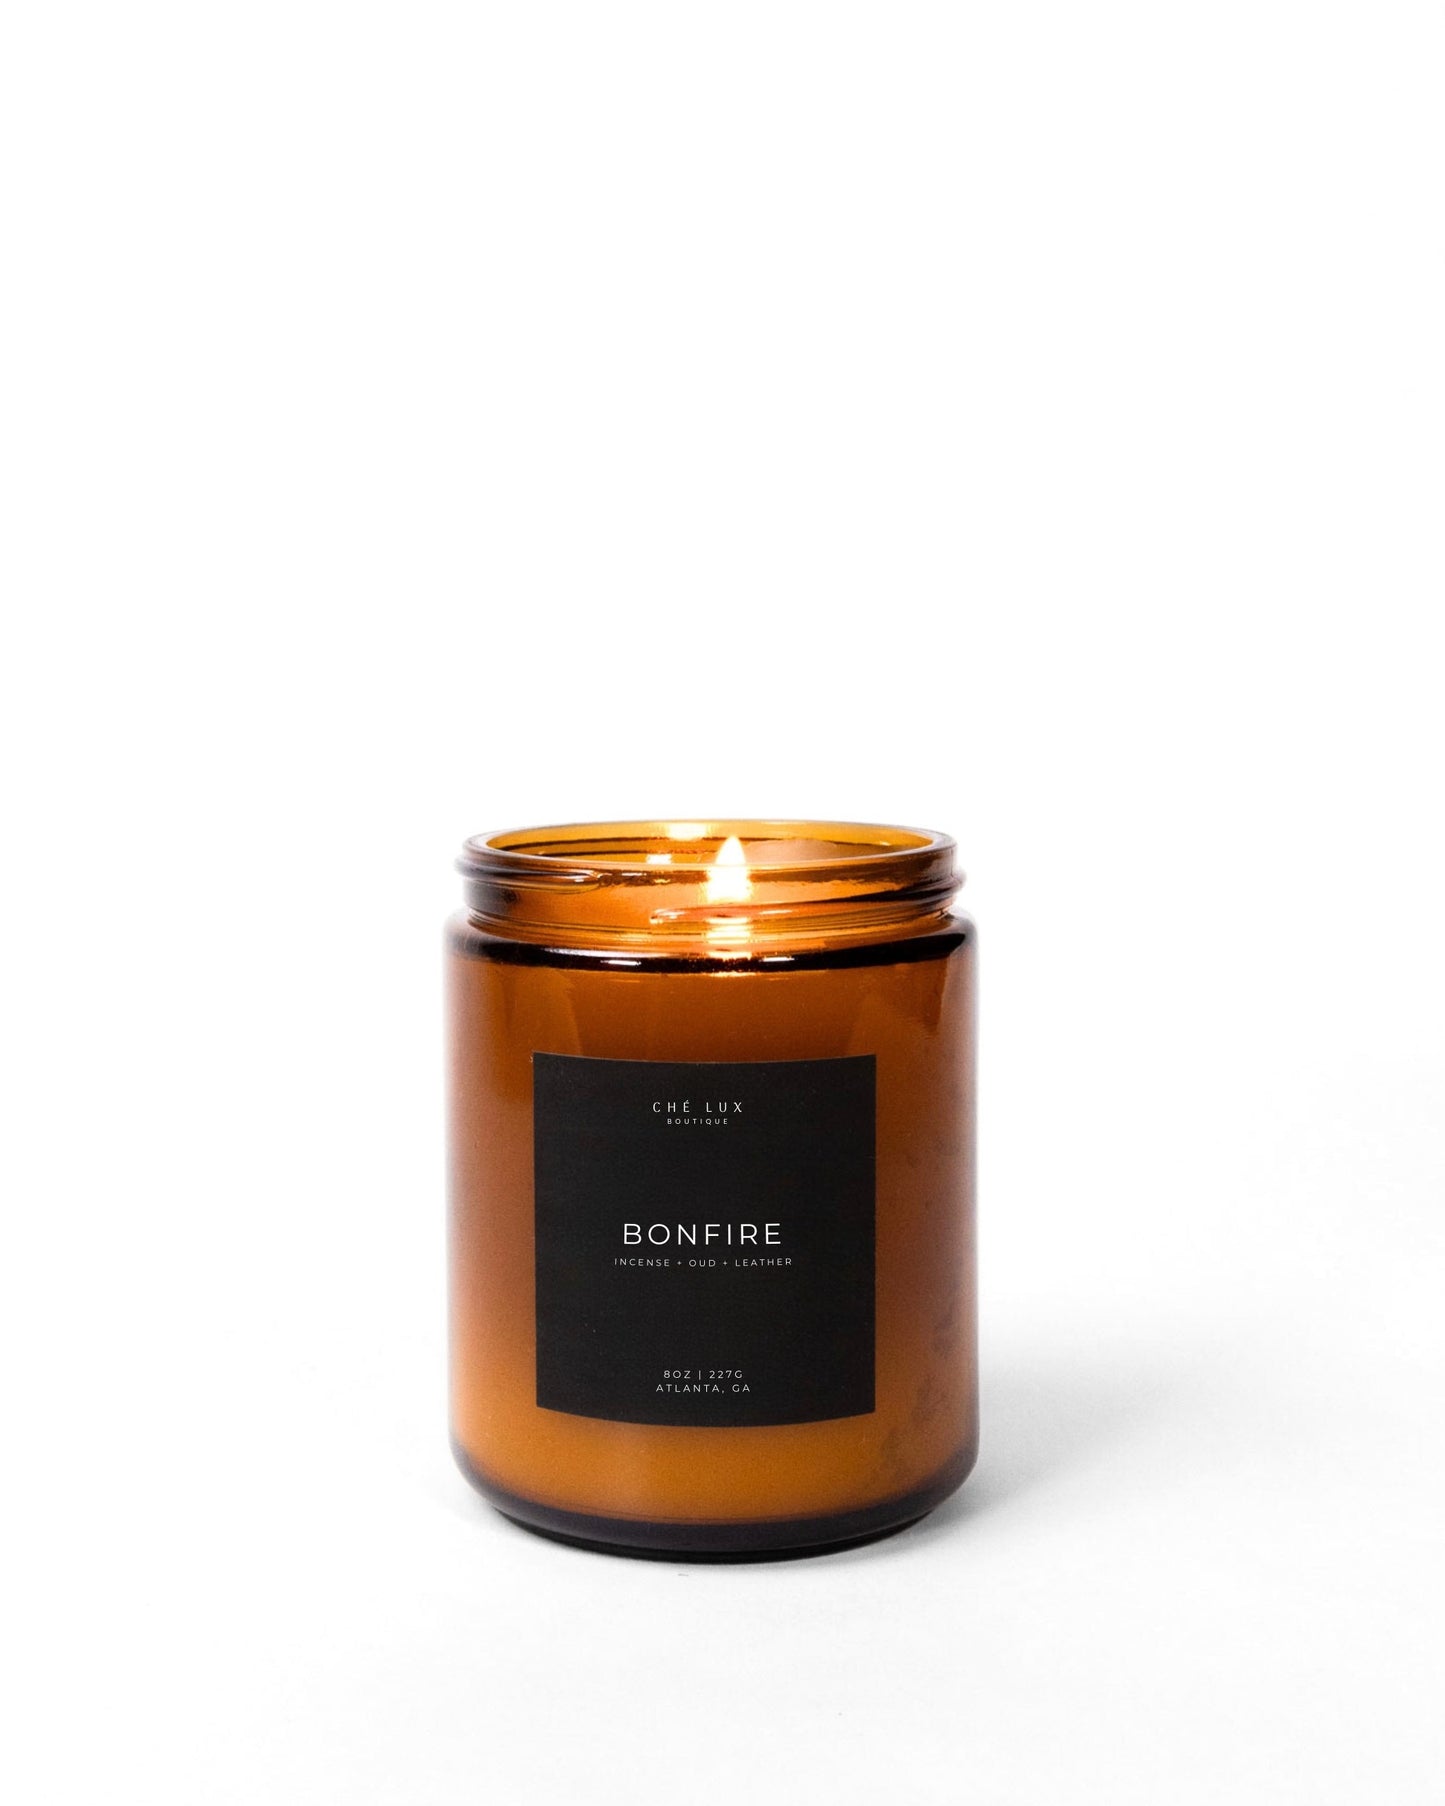 Bonfire is a Woody & Earthy Fragrance. A smokey blend of incense (frankincense and myrrh), oud, and leather.  Fragrance Notes: incense, oud, leather